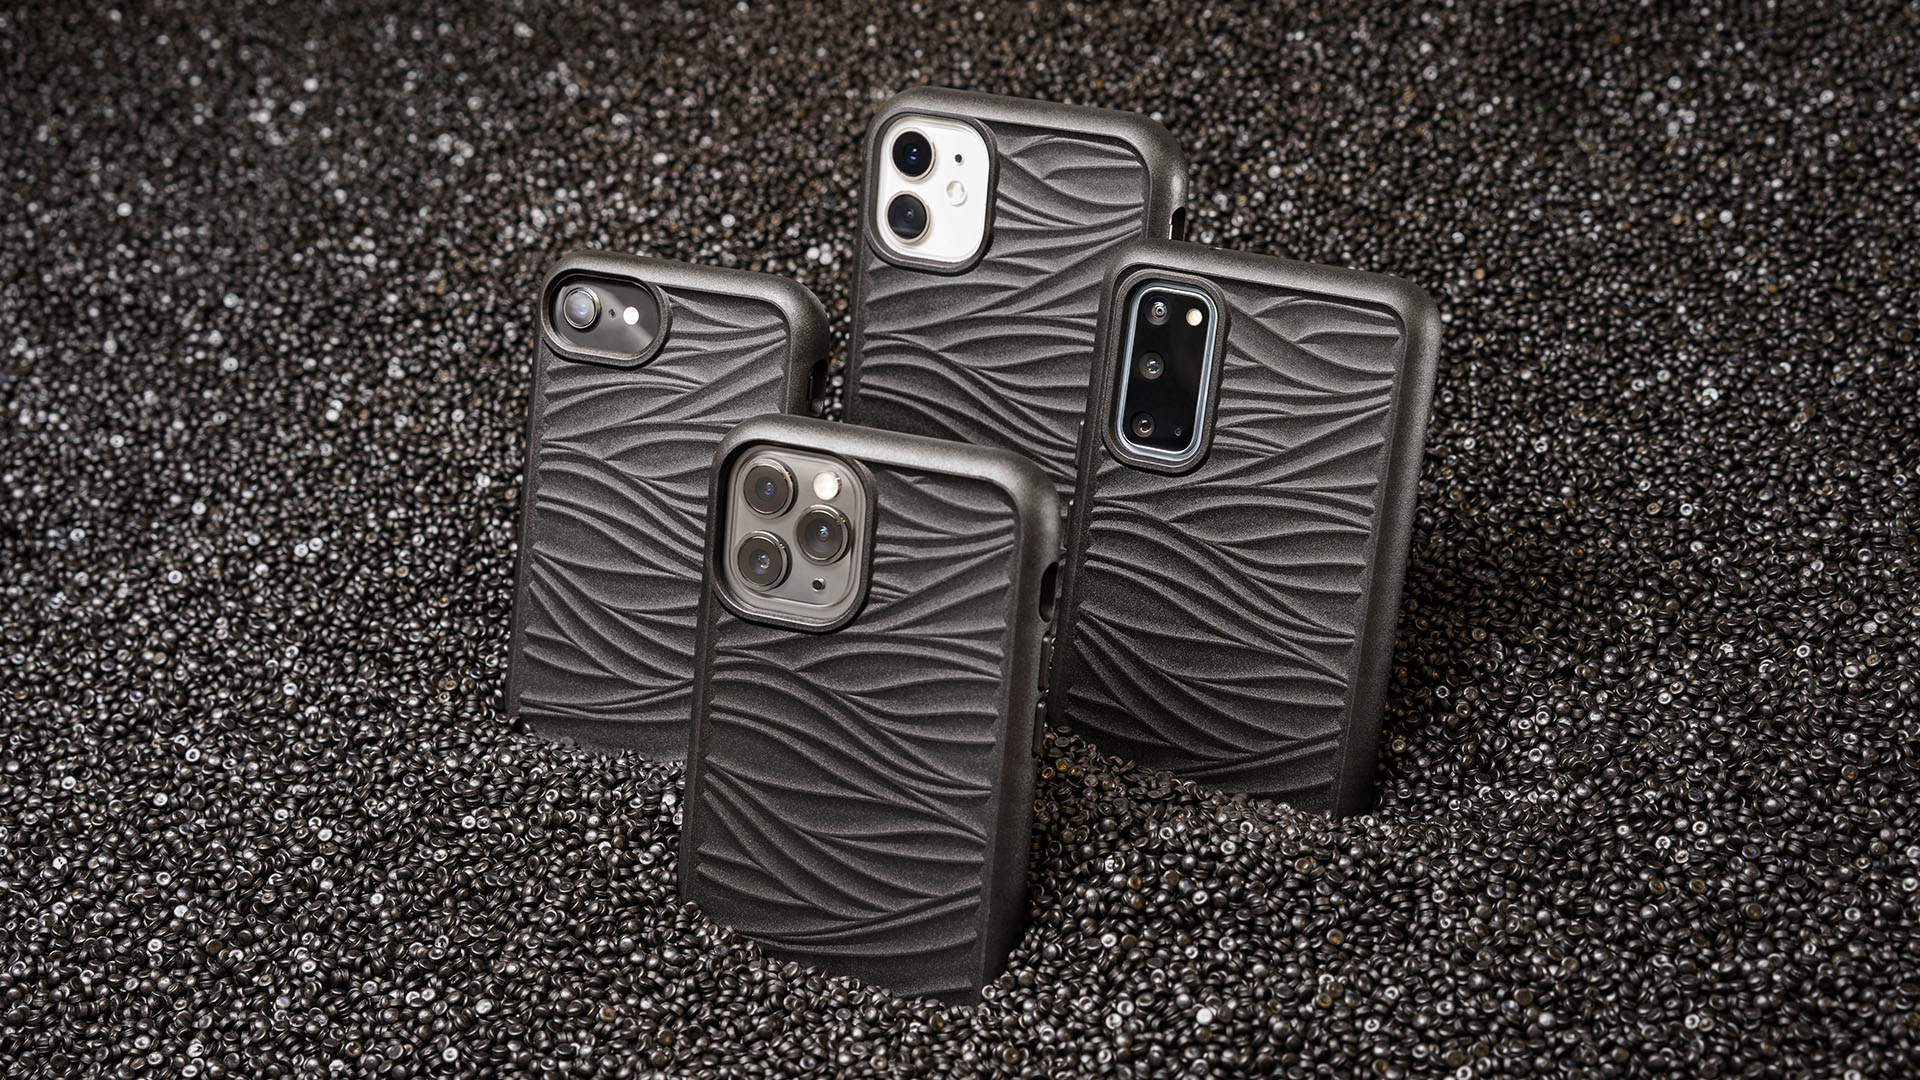 LifeProof Unveils Case Line Made from Recycled Ocean-Based Plastic